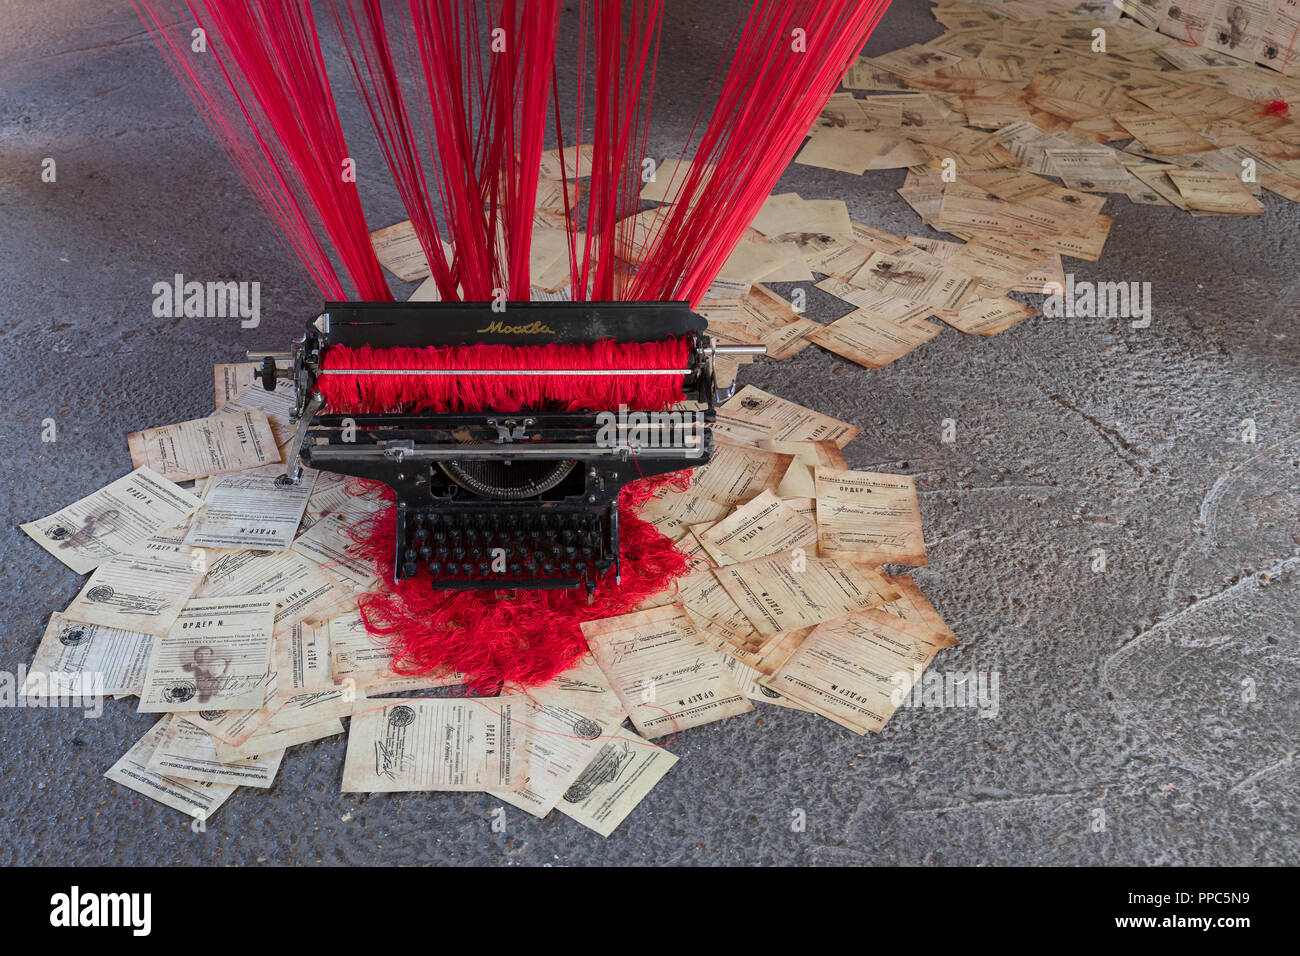 London, UK. 25th September 2018. Machine by Asel Kadyrkhanova, which commemorates millions of nameless victims of the Great Purge in the USSR in the 1930’s, by displaying thousands of arrest warrants with erased data, posing questions of individual participation in collective violence. Credit: Vickie Flores/Alamy Live News Stock Photo